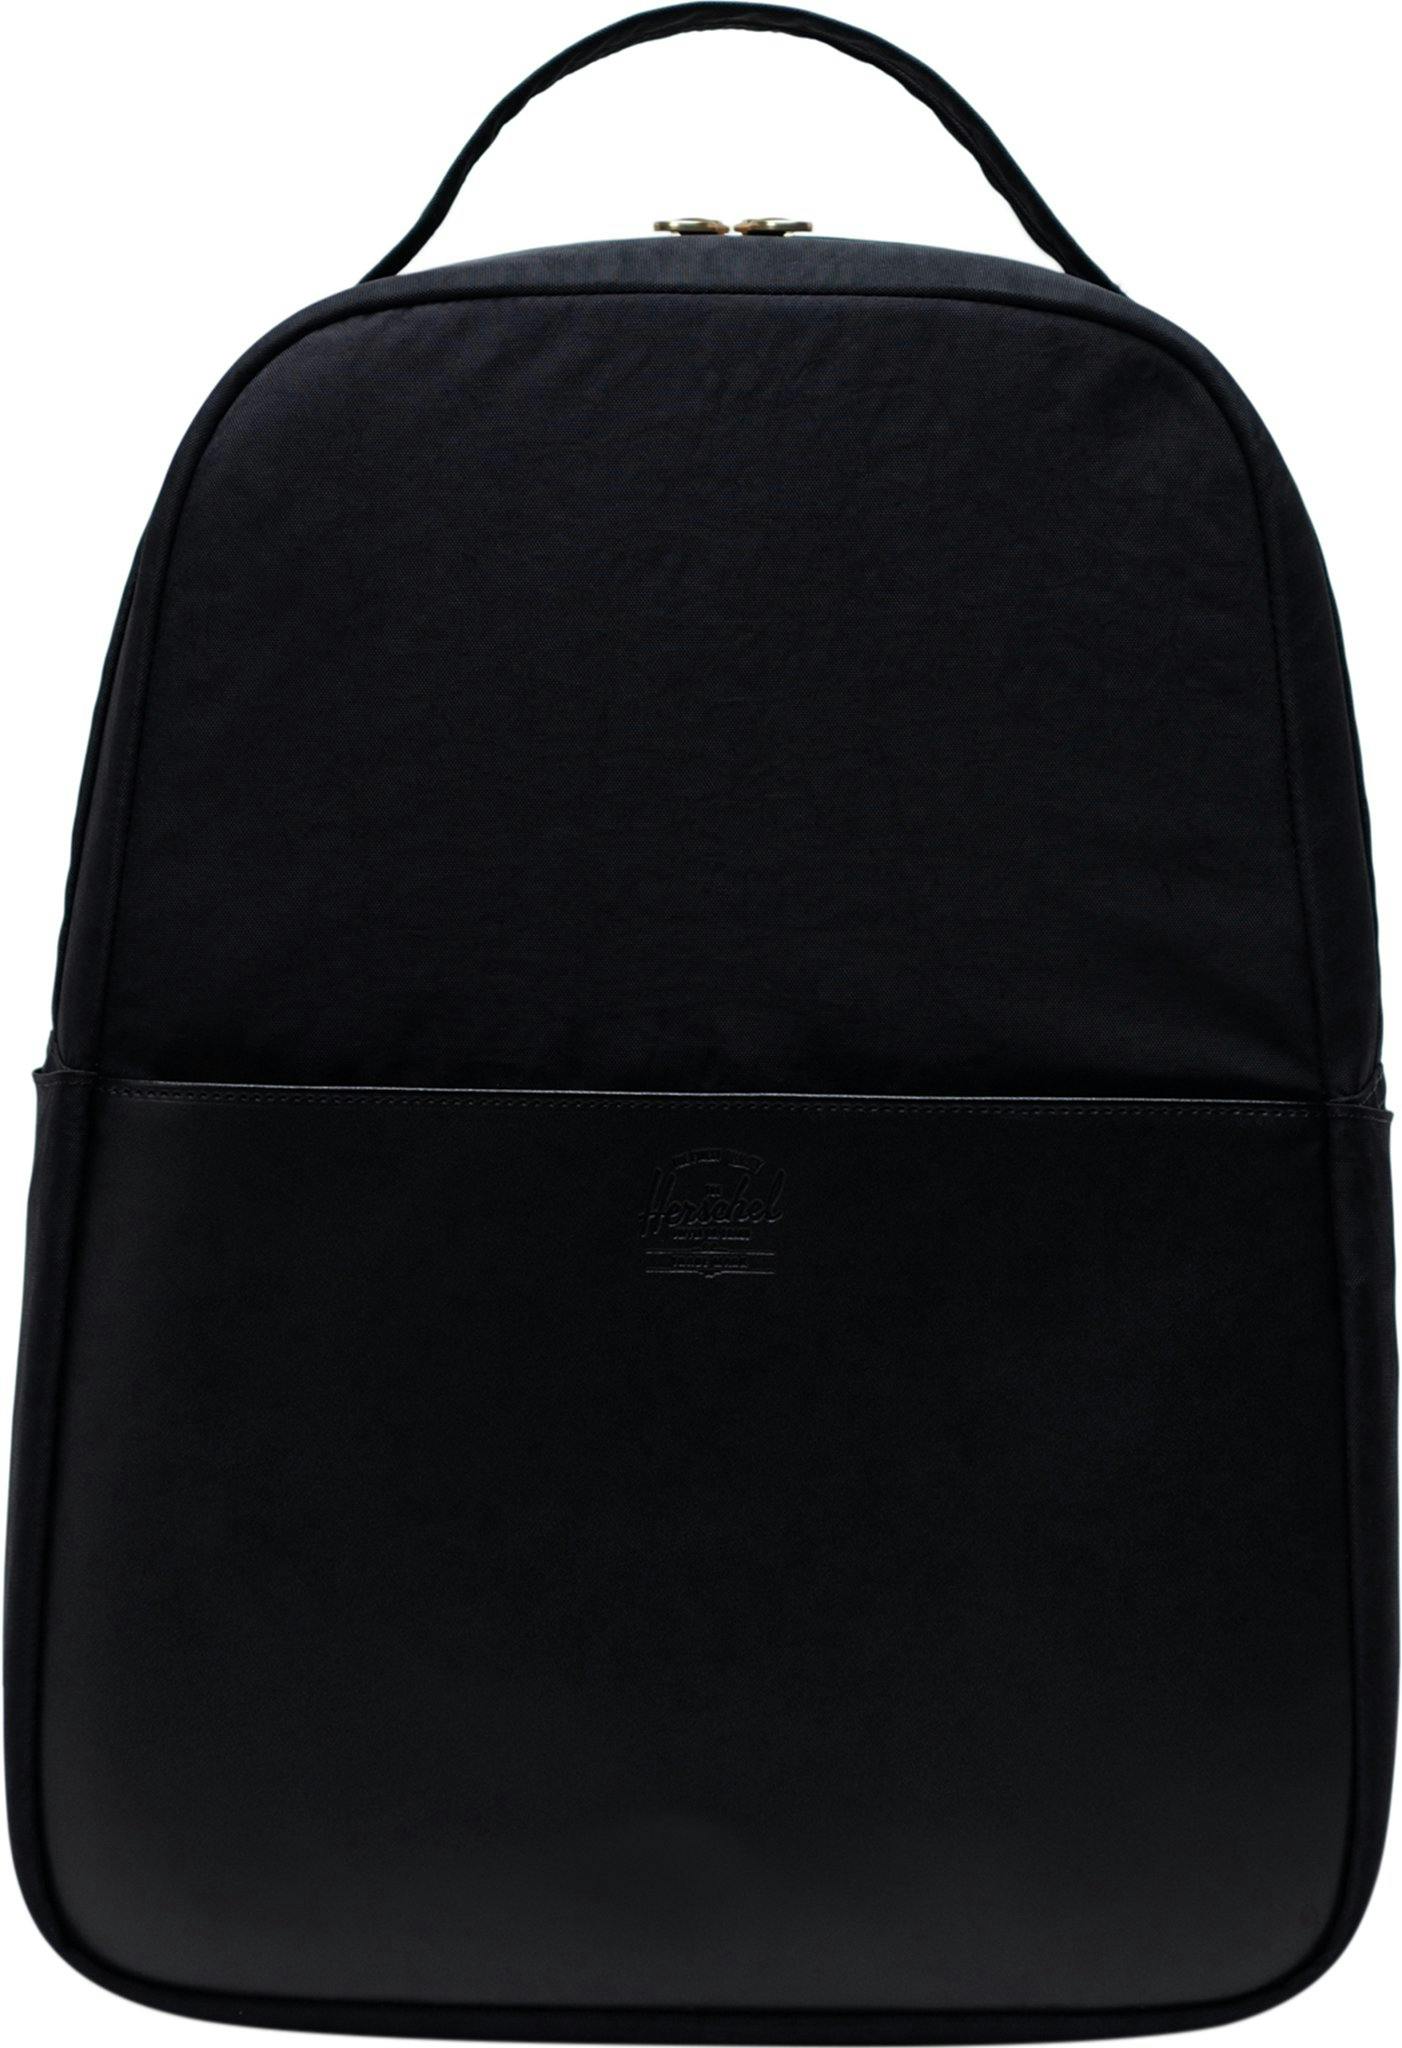 Product image for Orion Mid-Volume Backpack 18.5L